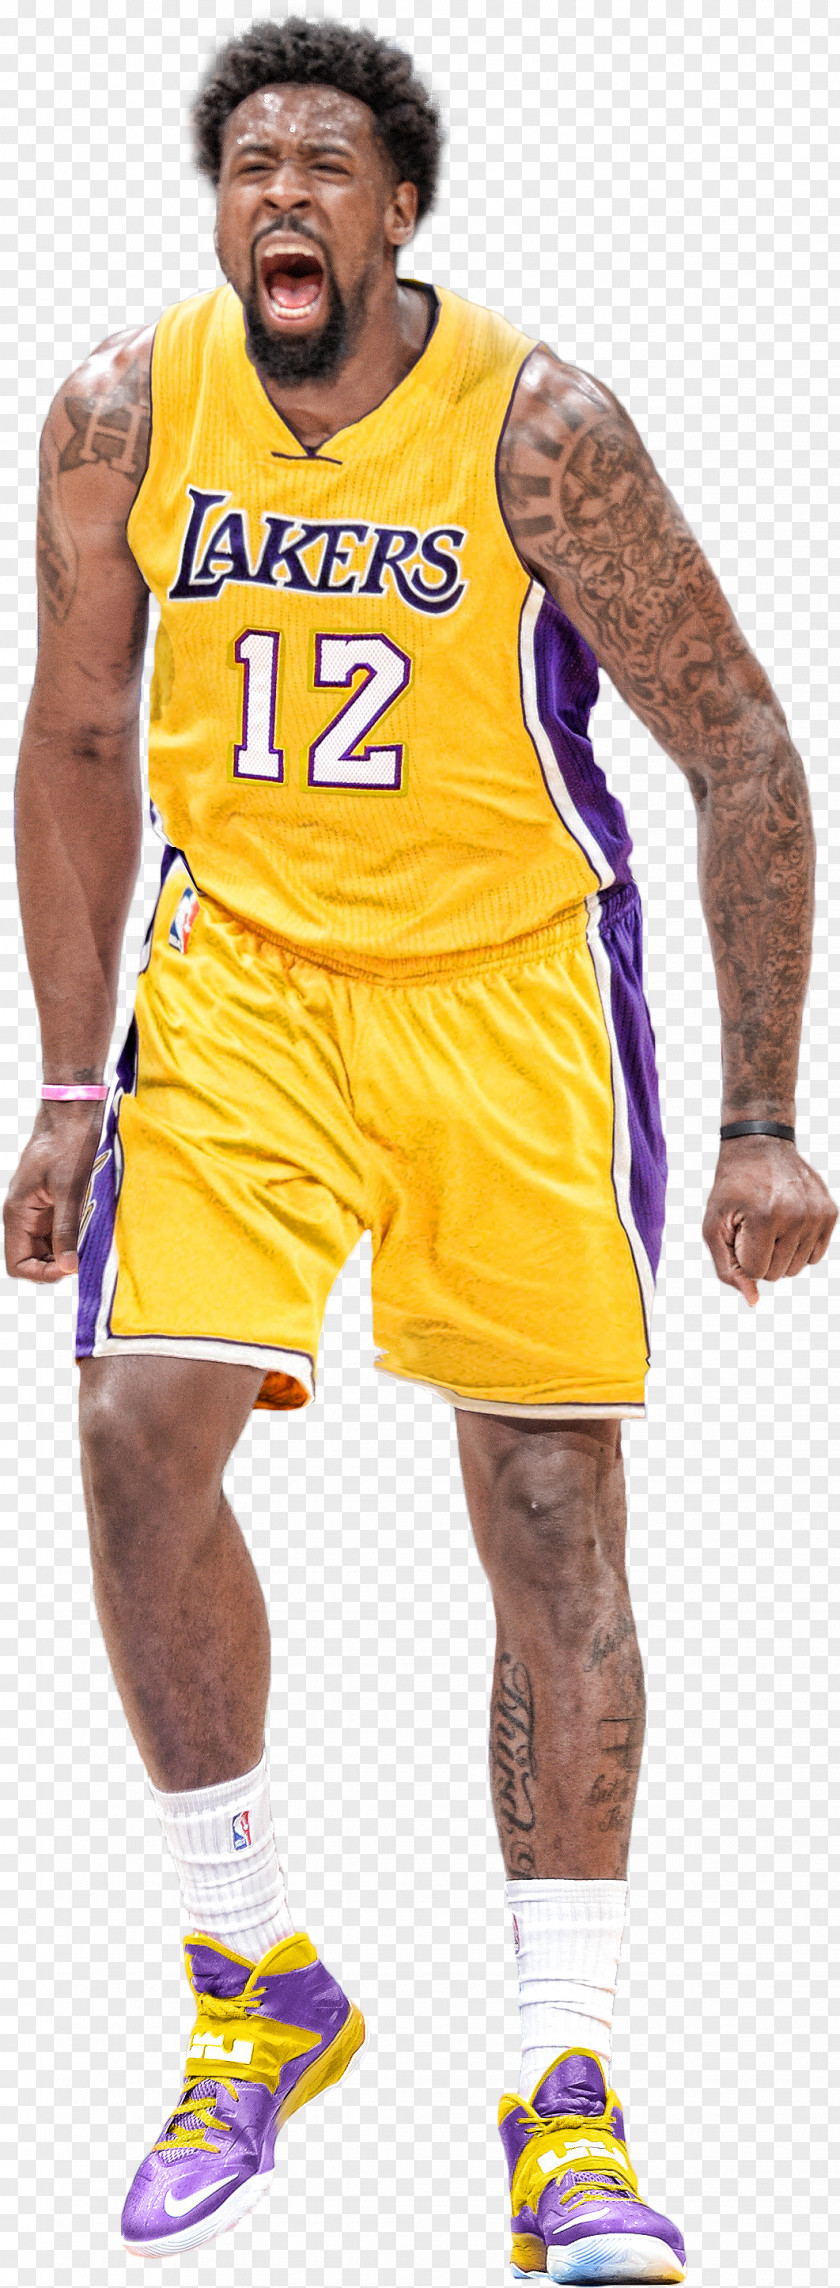 Ohio State Buckeyes Mens Basketball D'Angelo Russell Jersey Los Angeles Lakers Player 2014–15 NBA Season PNG